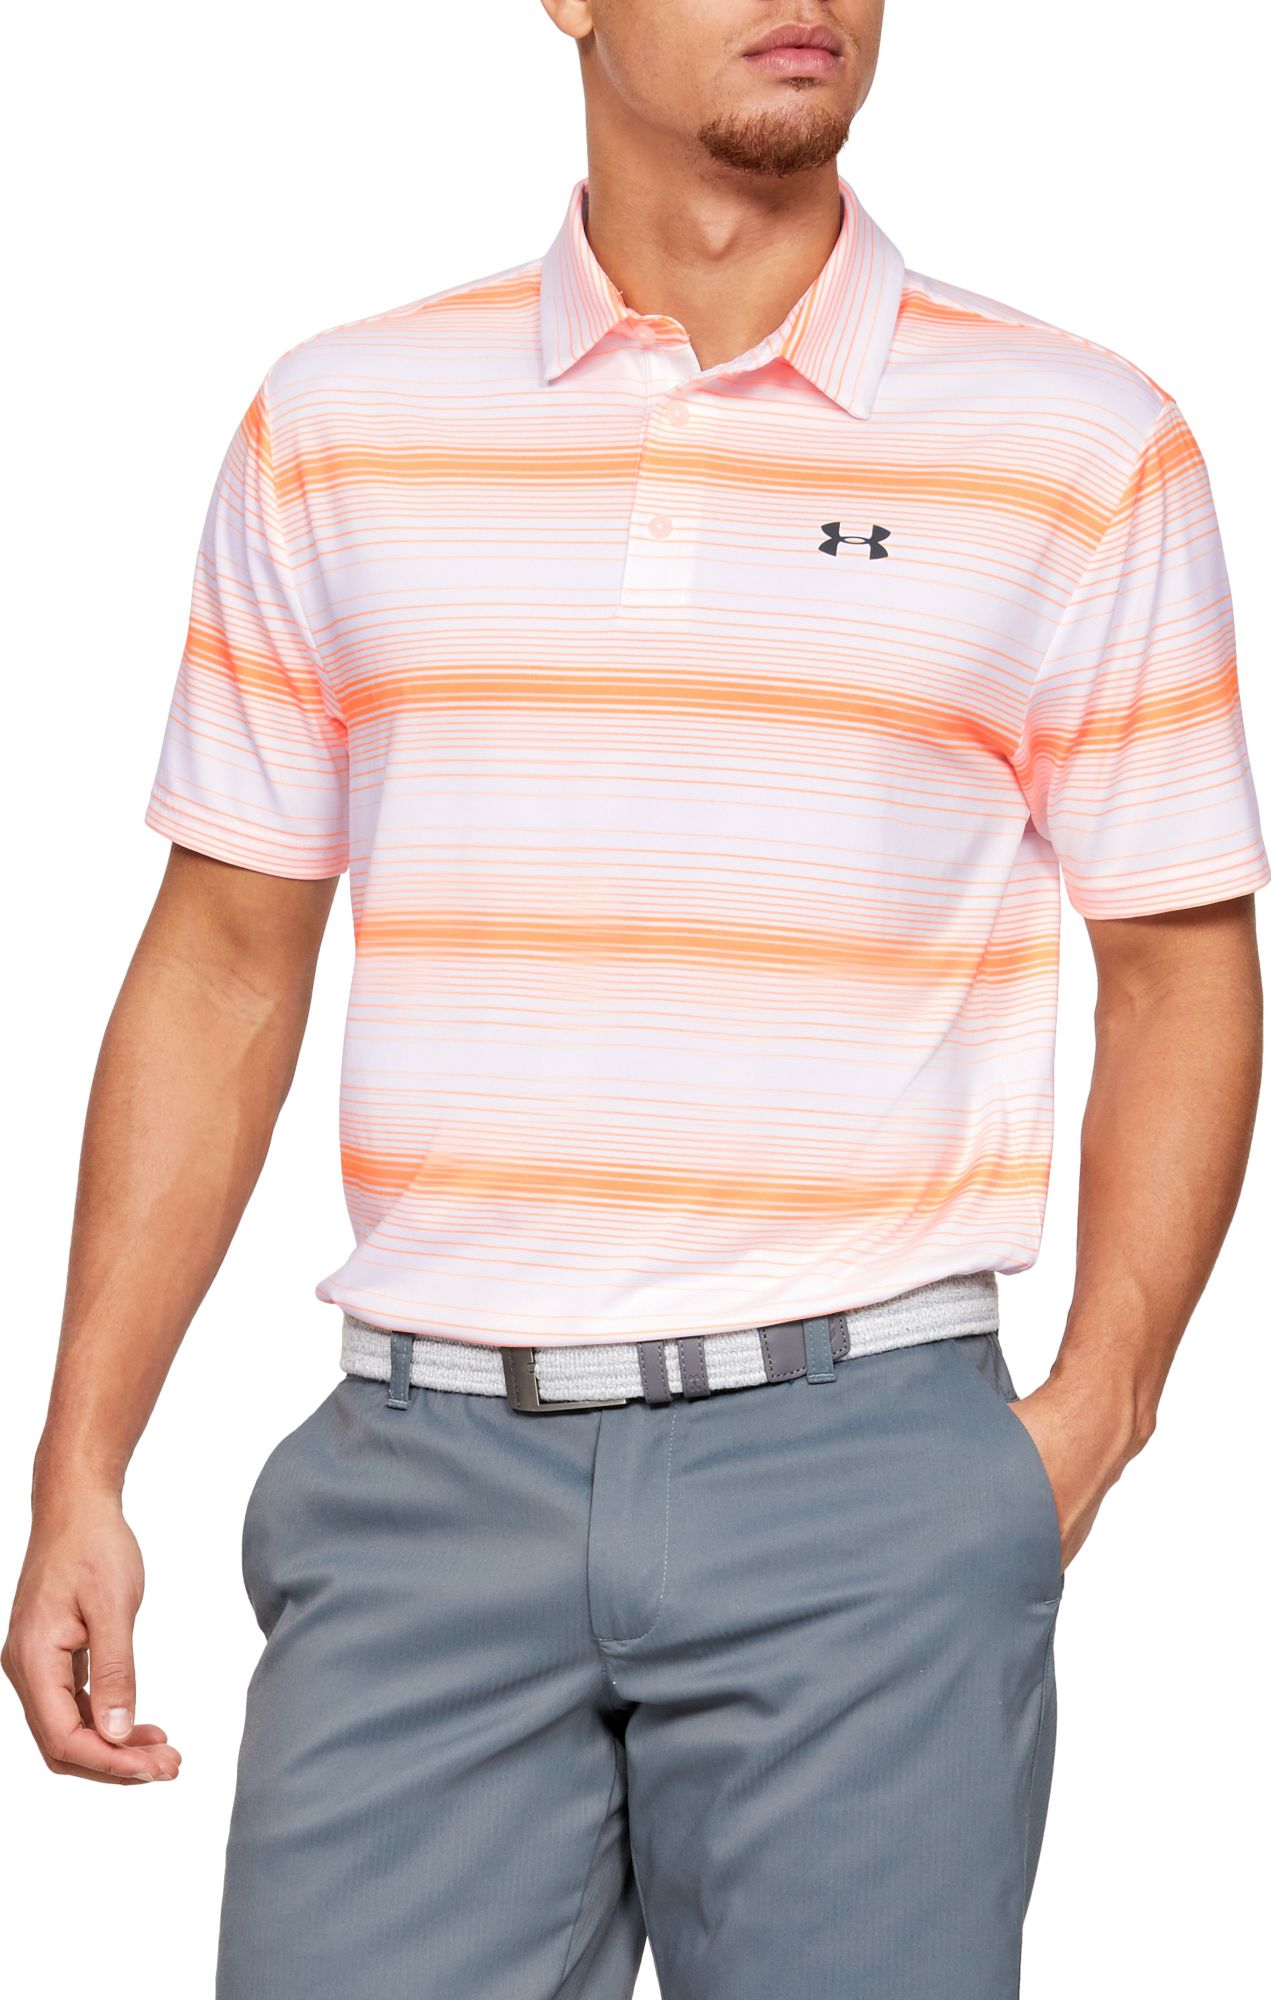 under armour playoff golf polo